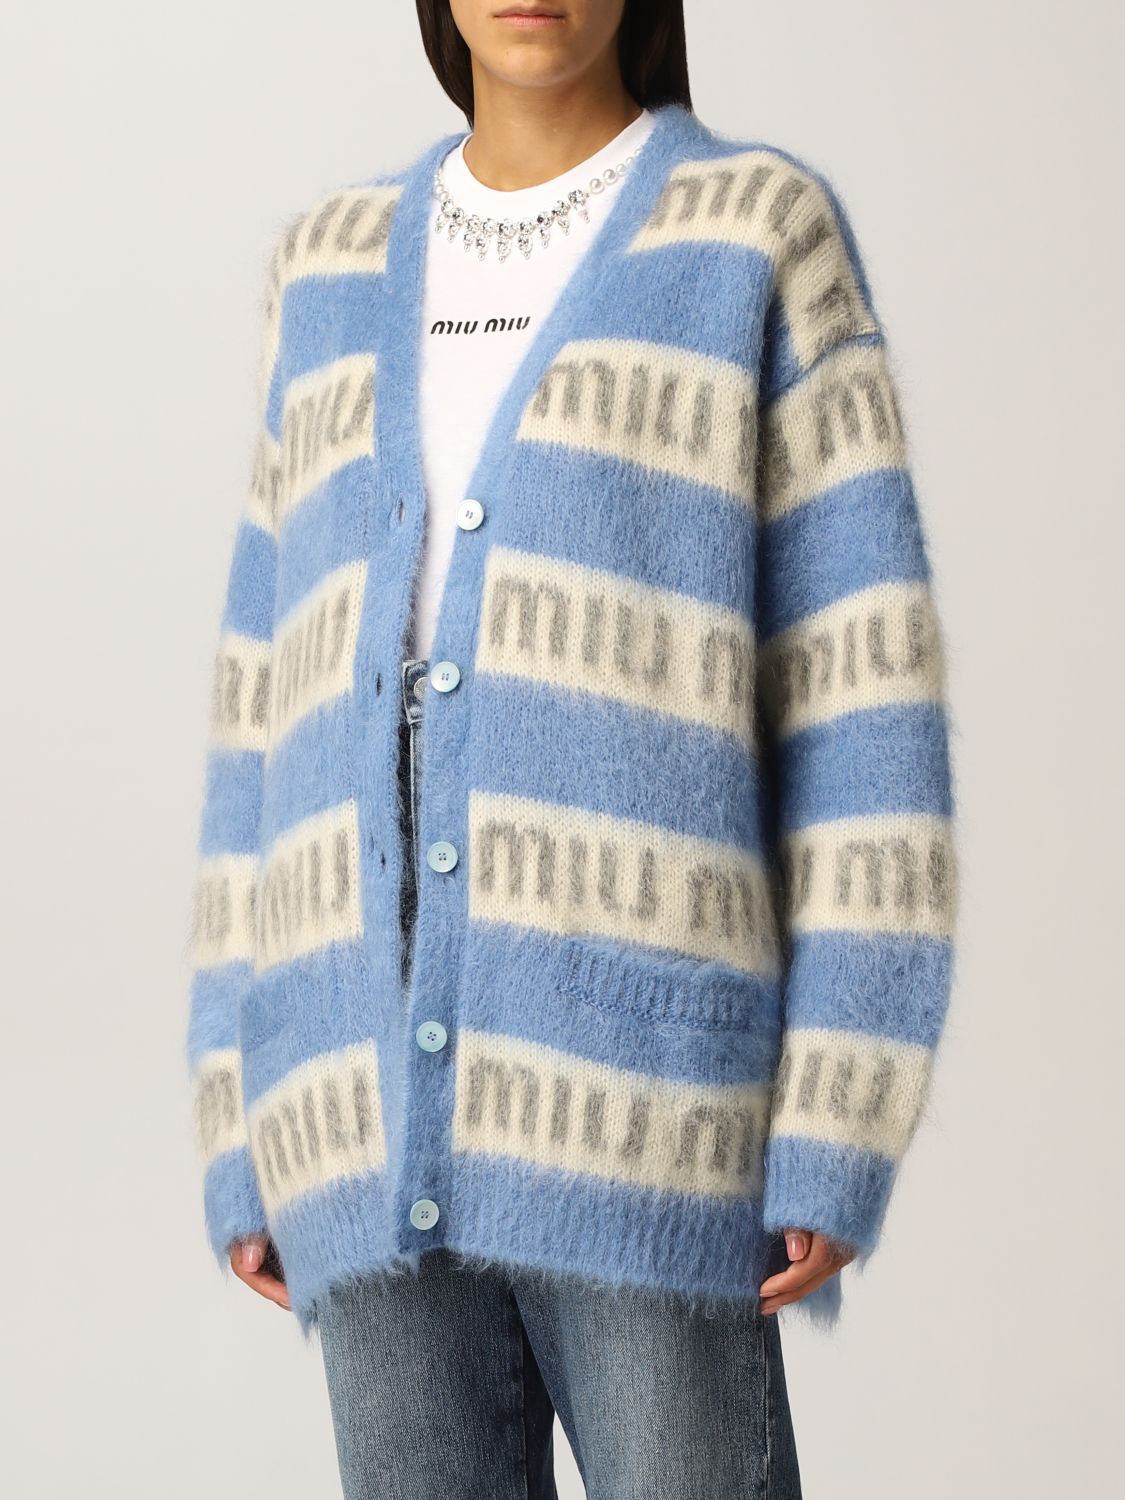 Miu Miu over cardigan in mohair with all-over logo